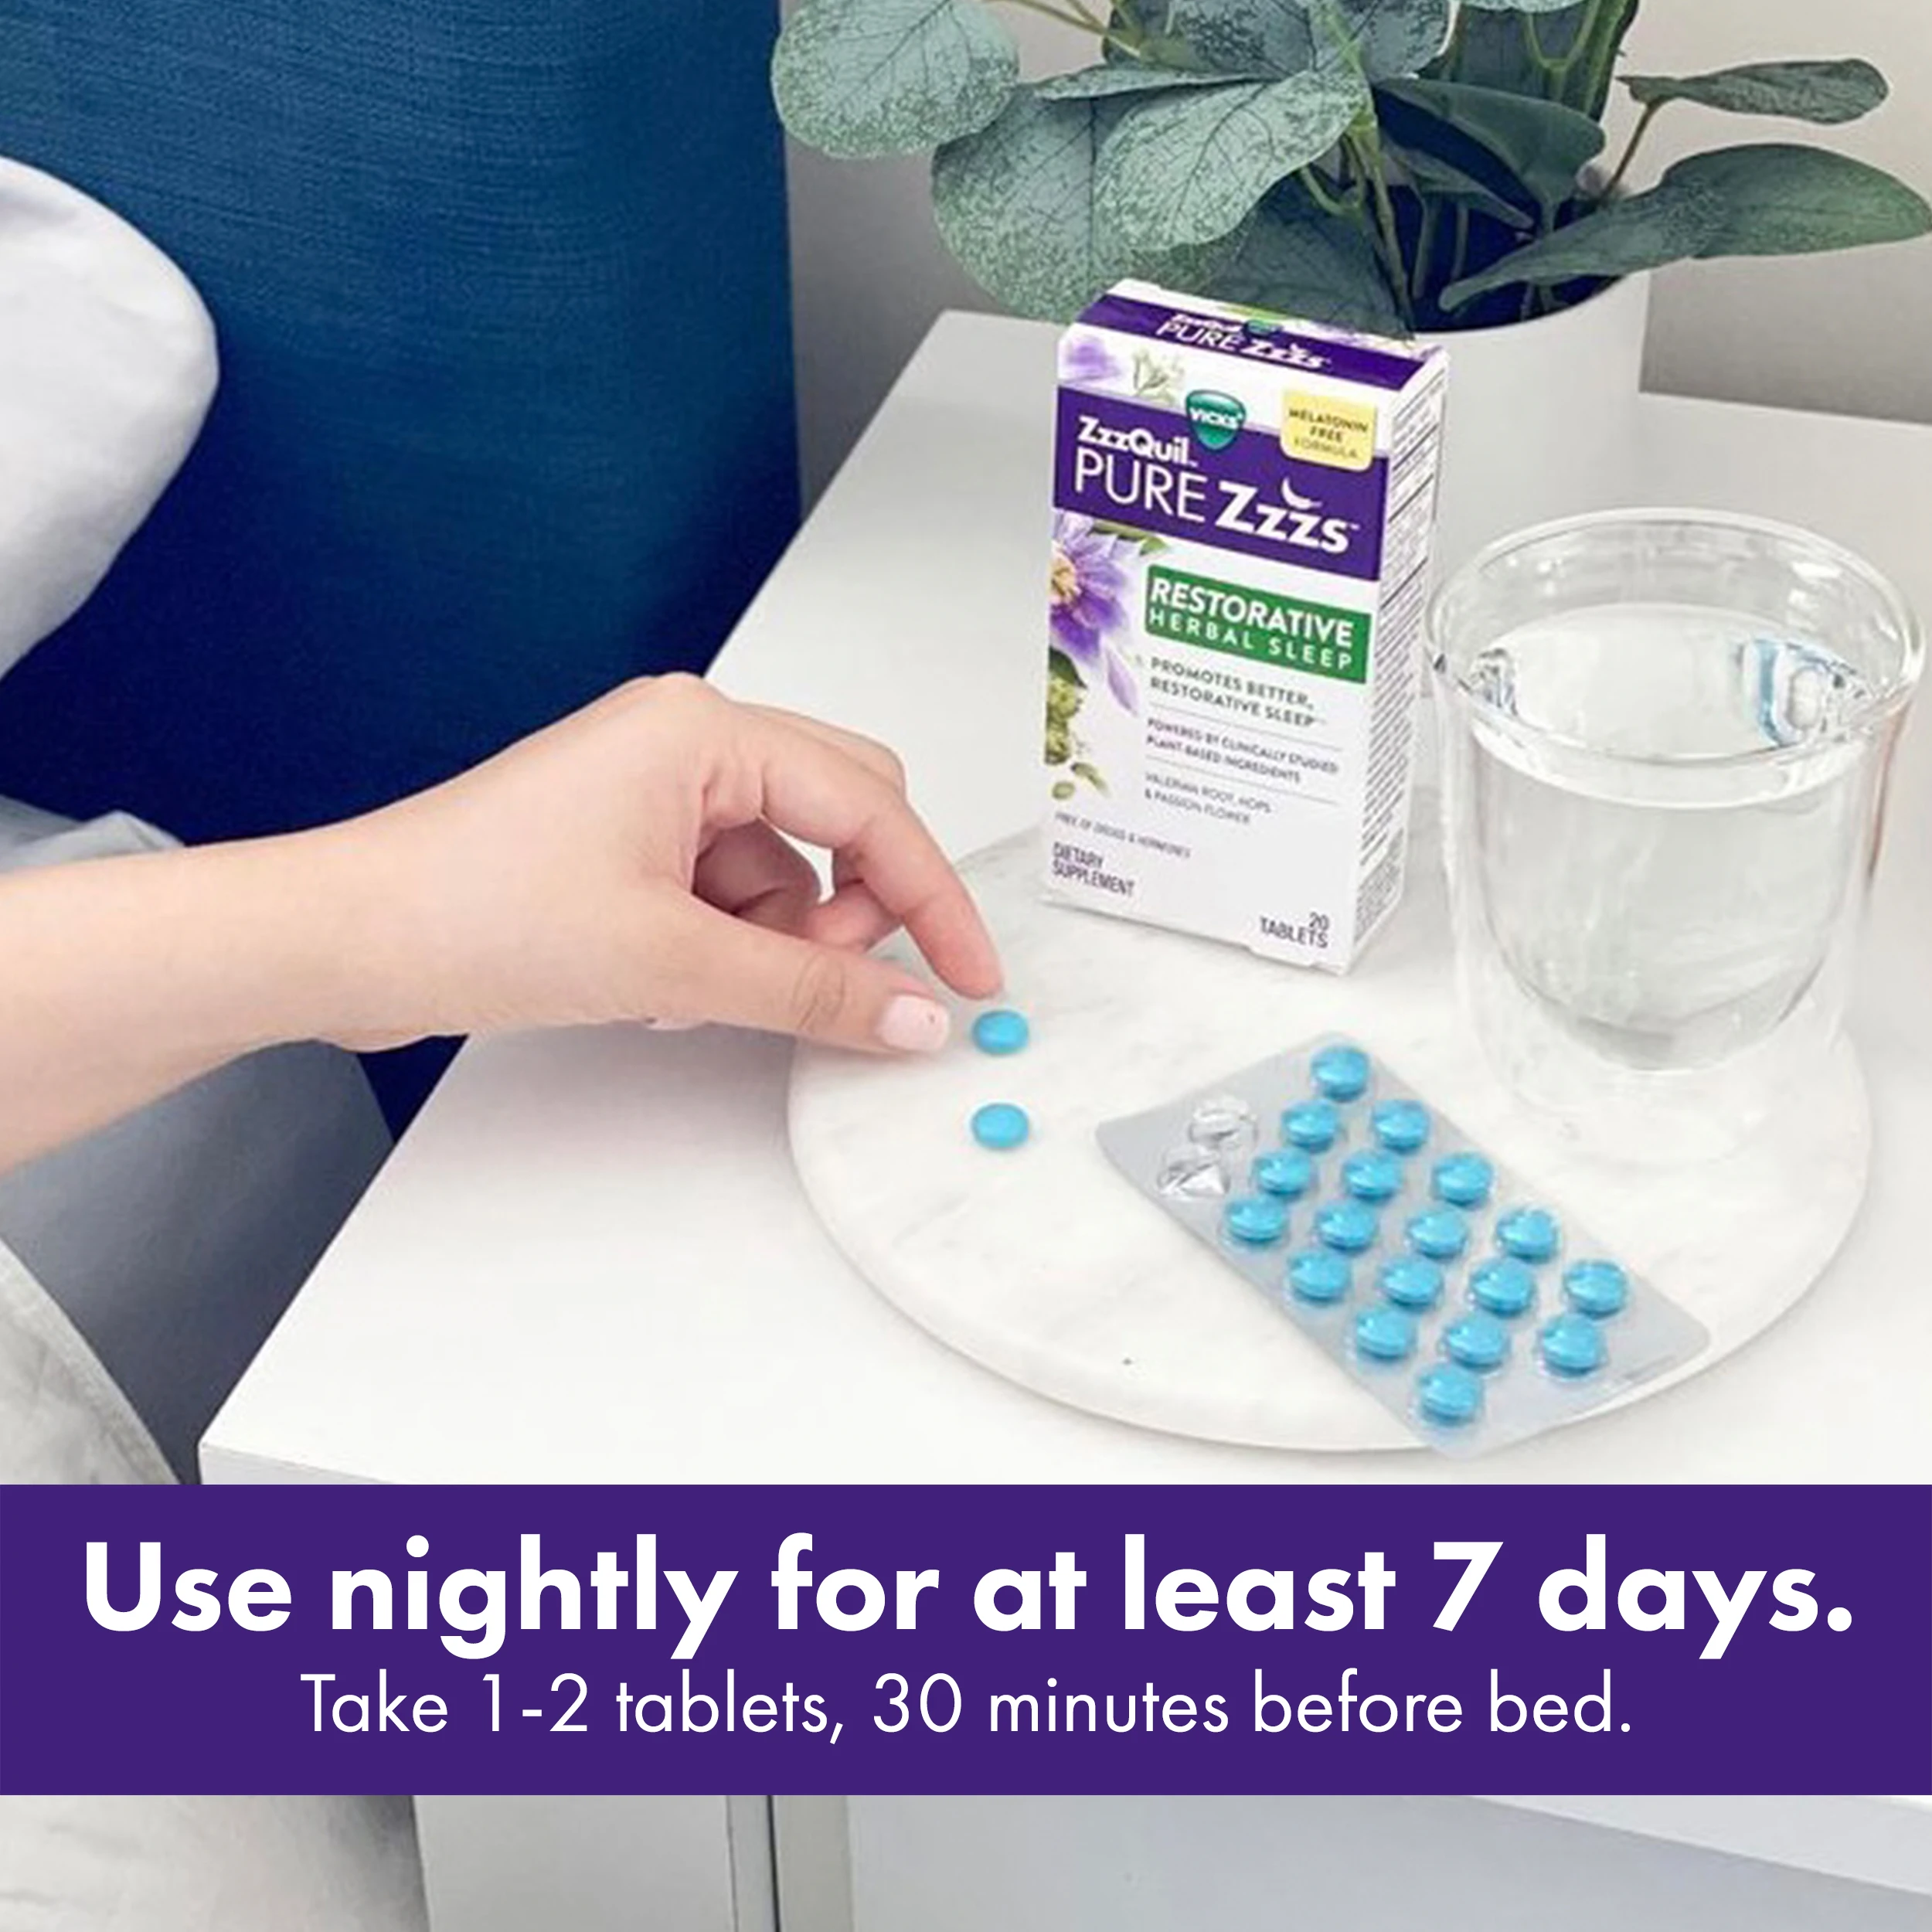 Don't sleep on Always ZZZs ‼️ Add them to your period routine like @oh